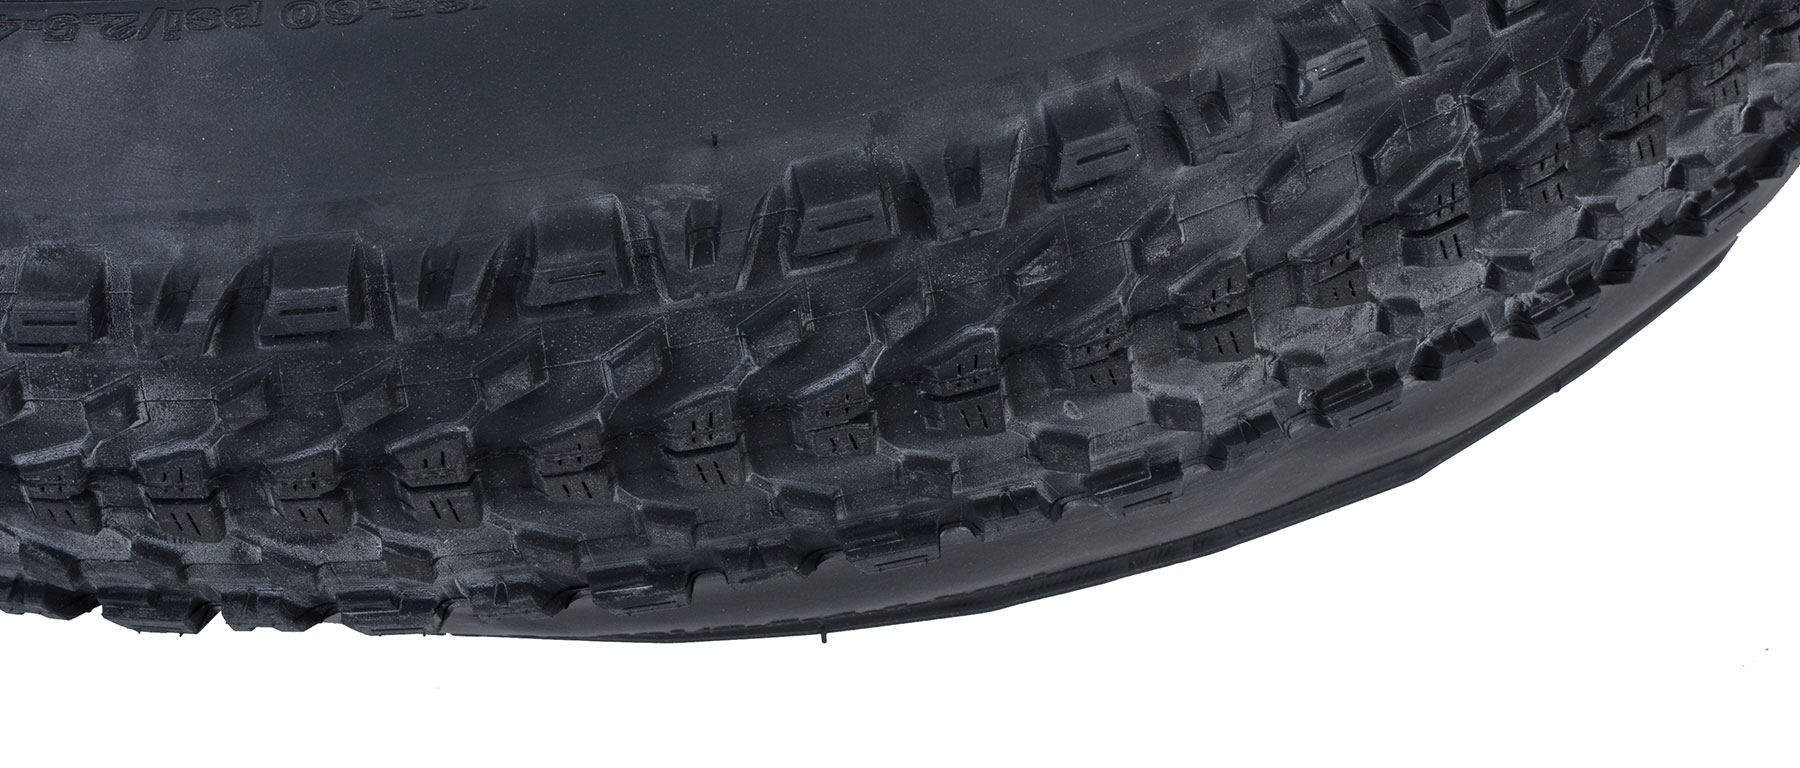 Maxxis Ardent Race 3C EXO TR Tubeless Tire